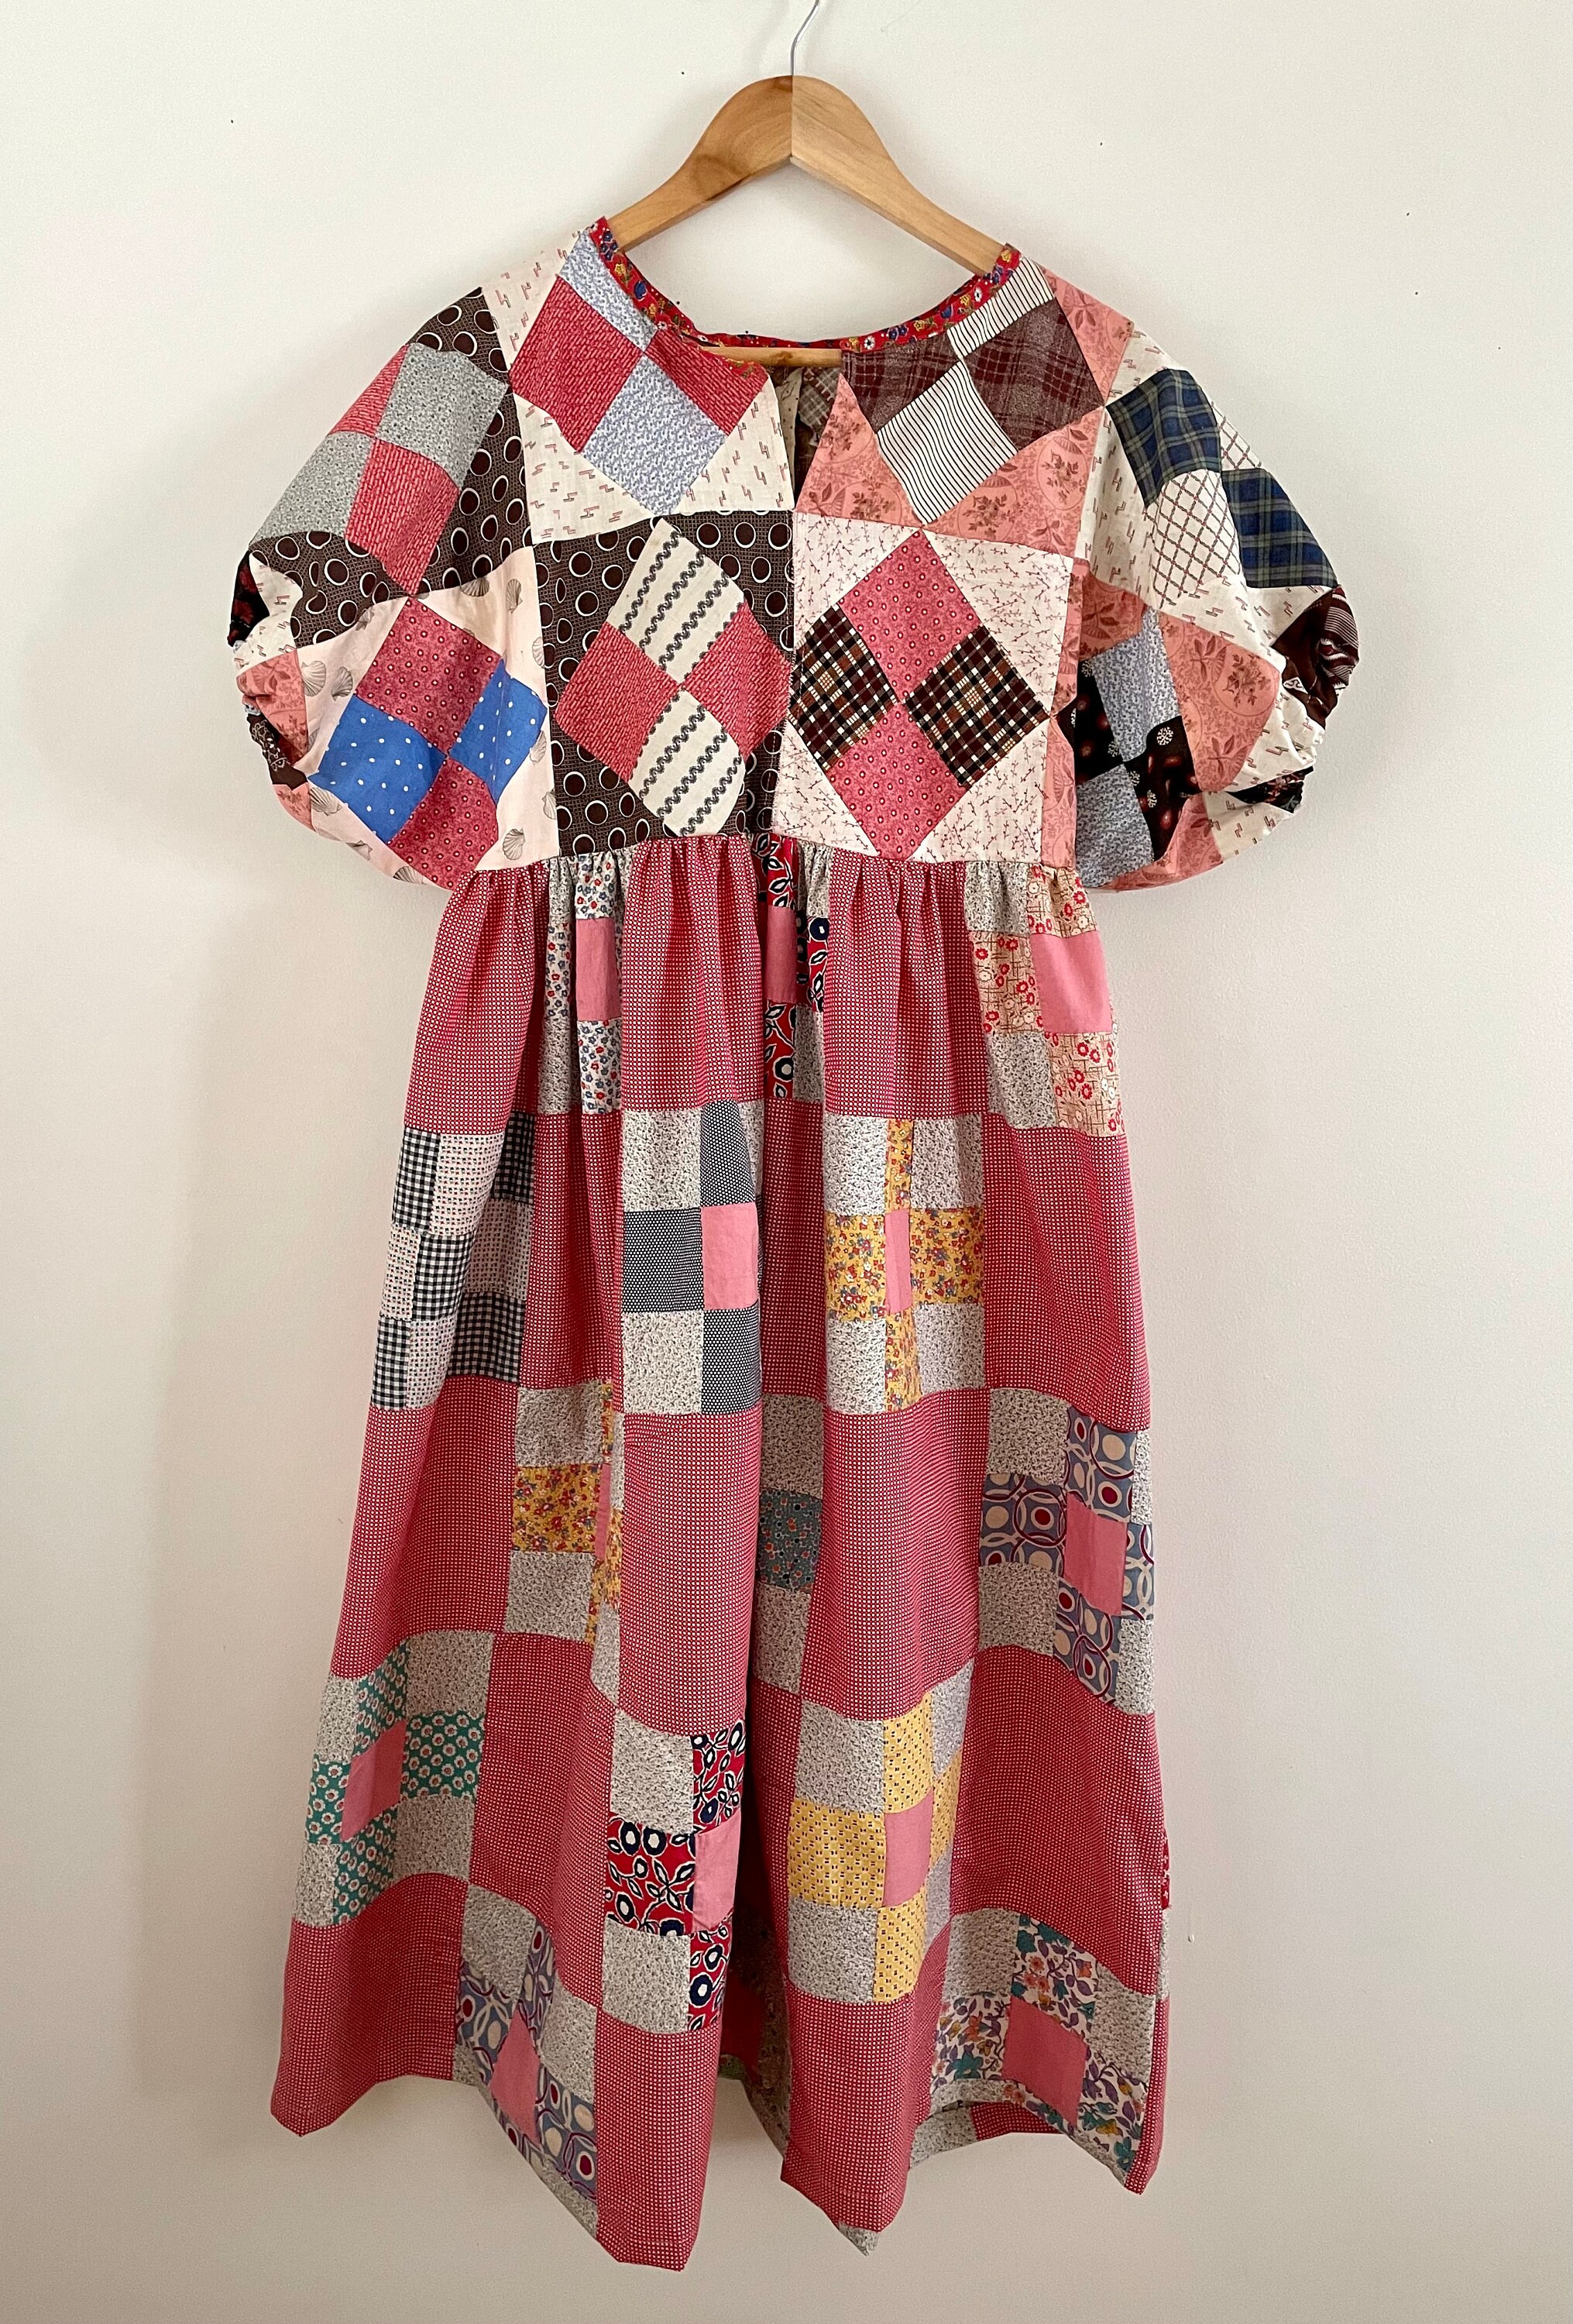 Prairie Patchwork Dress / Maxi Quilt Top Dress / One of a Kind - Etsy